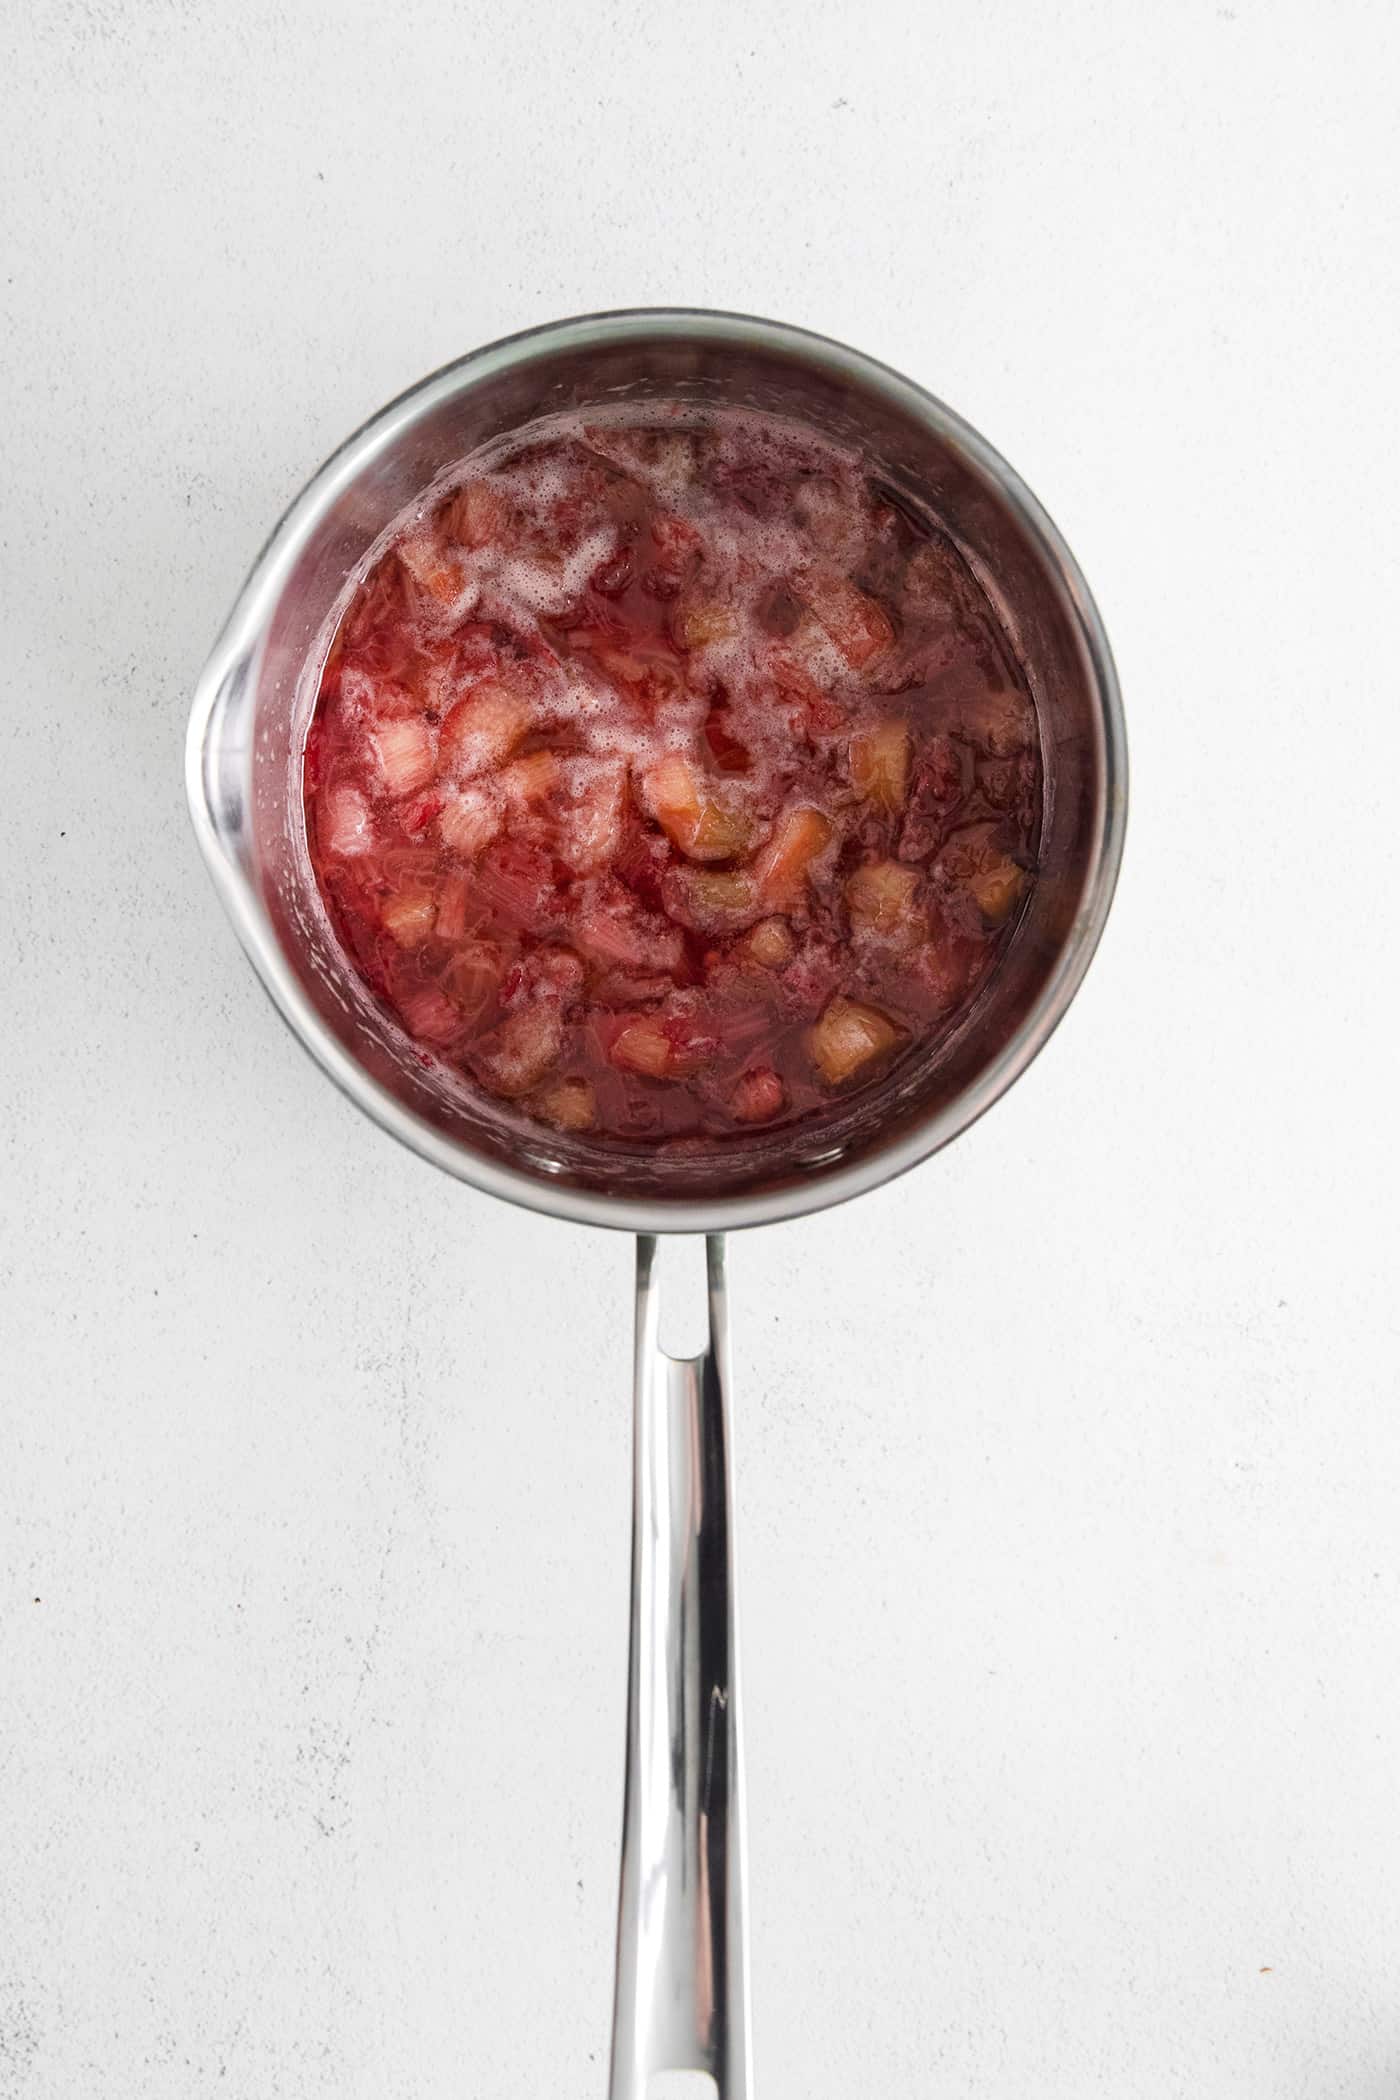 Softened pieces of rhubarb in a sauce pan